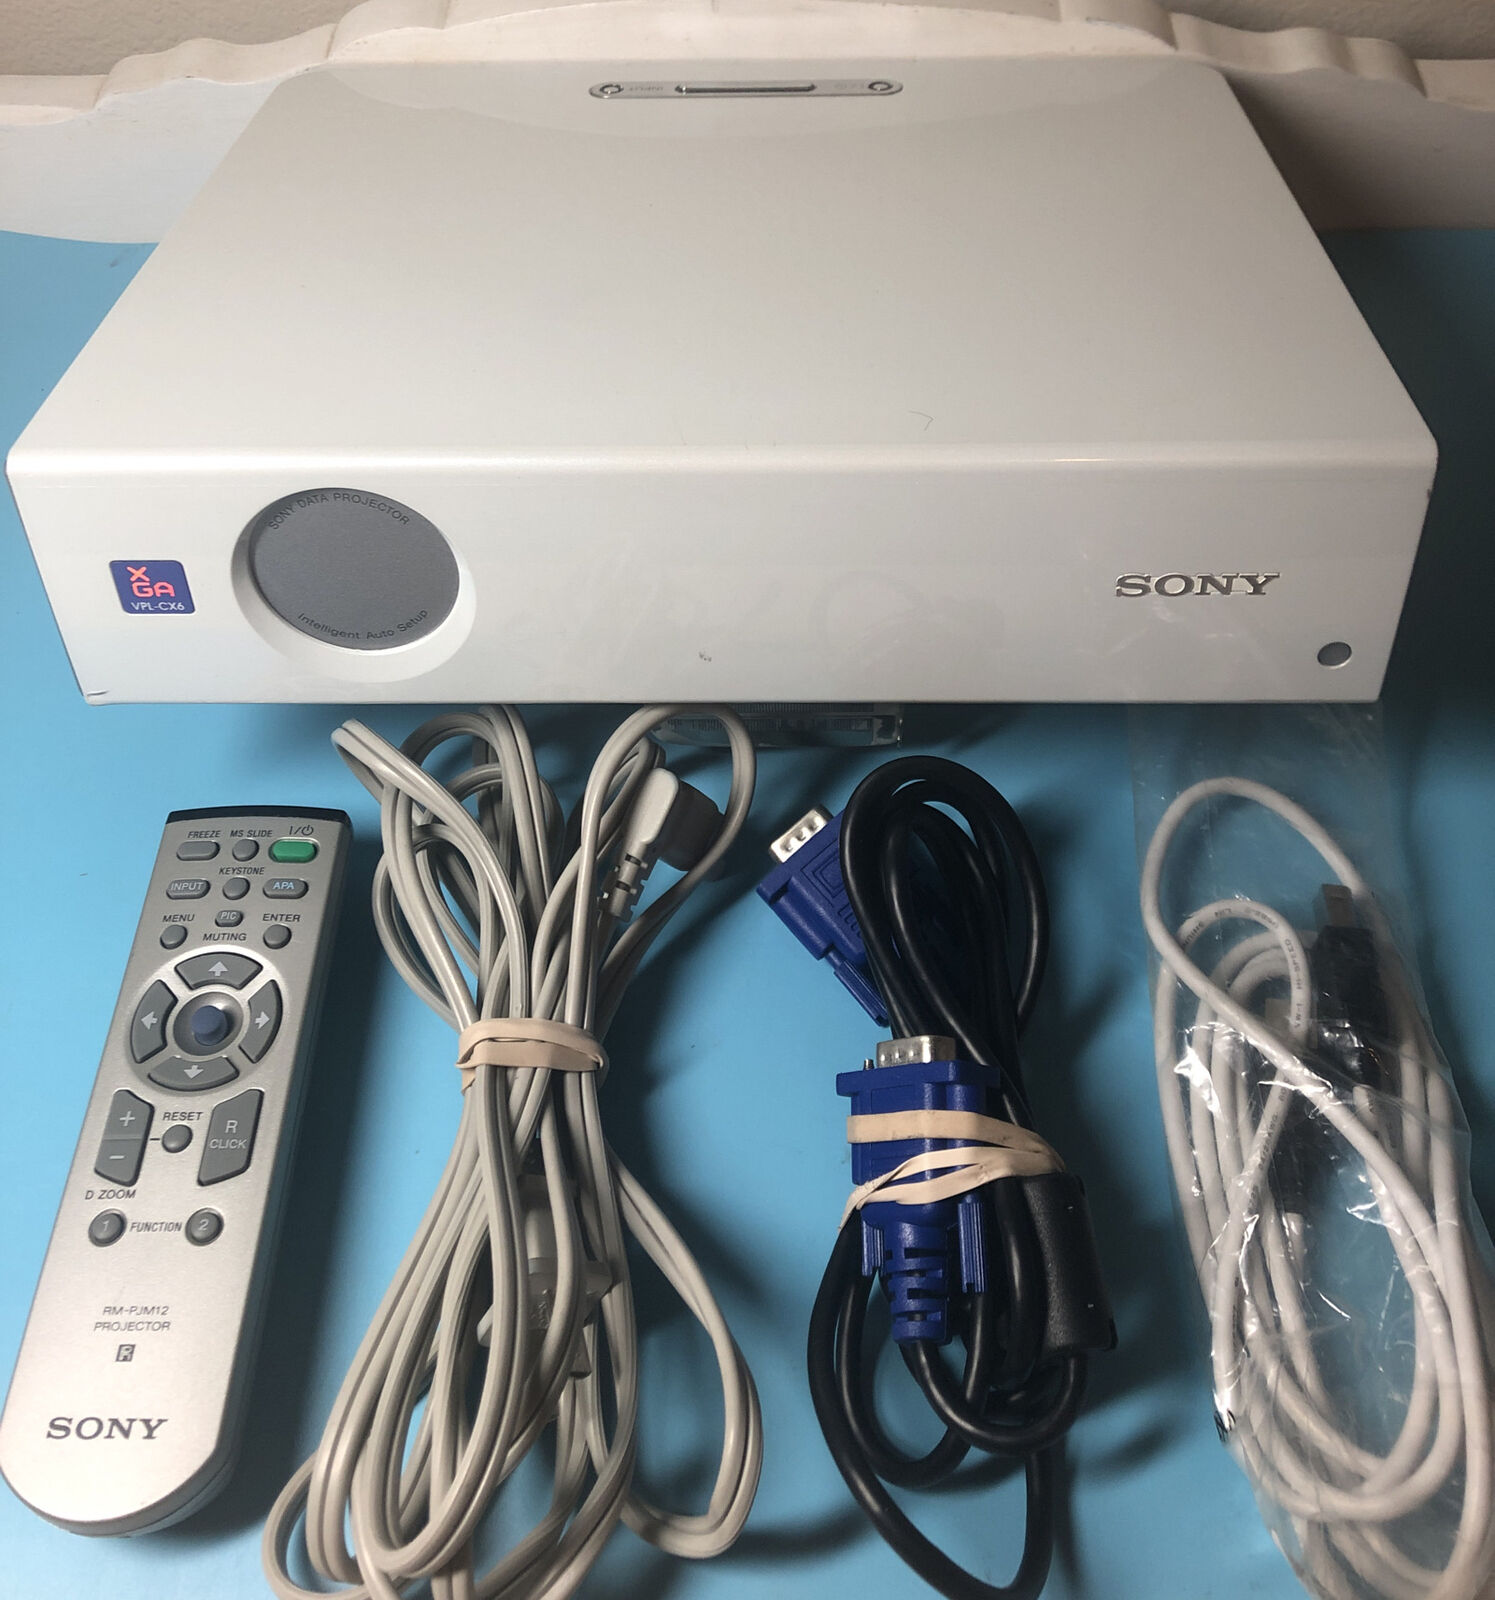 Sony VPL-CX6 projector, Working with power cable,  USB B to USB A cable, remote